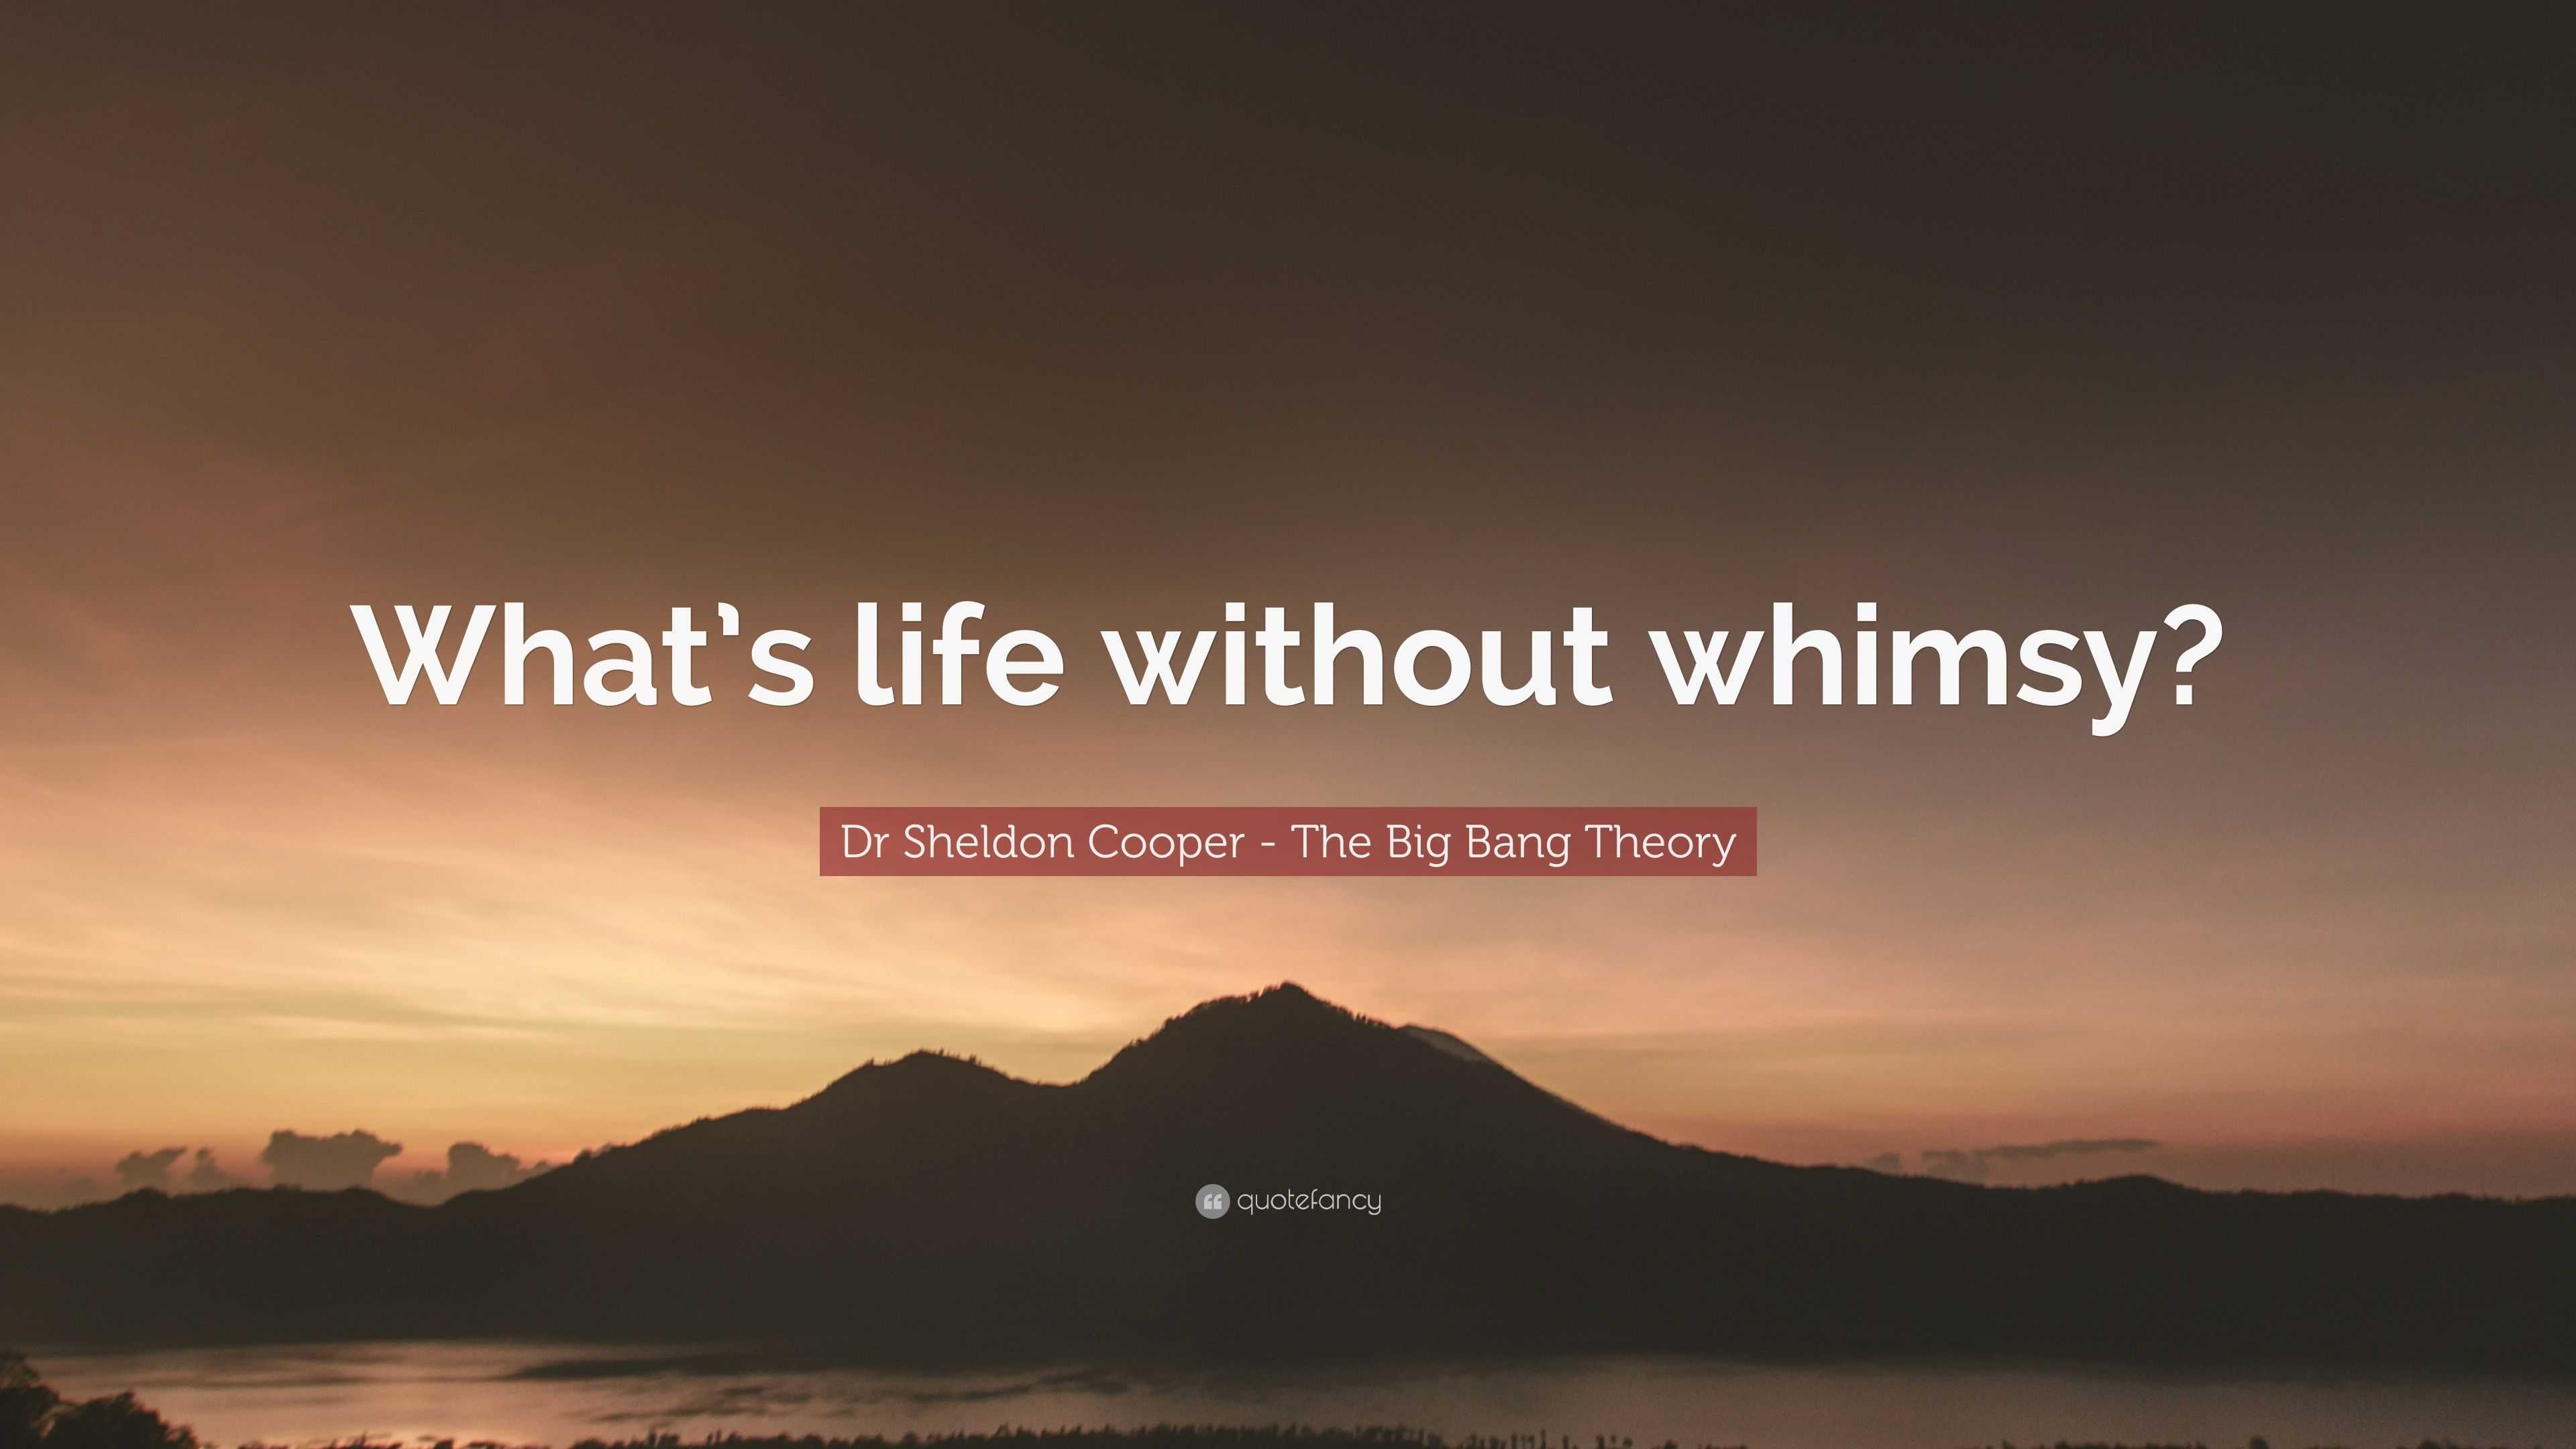 Dr Sheldon Cooper - The Big Bang Theory Quote: “What's life without whimsy?”